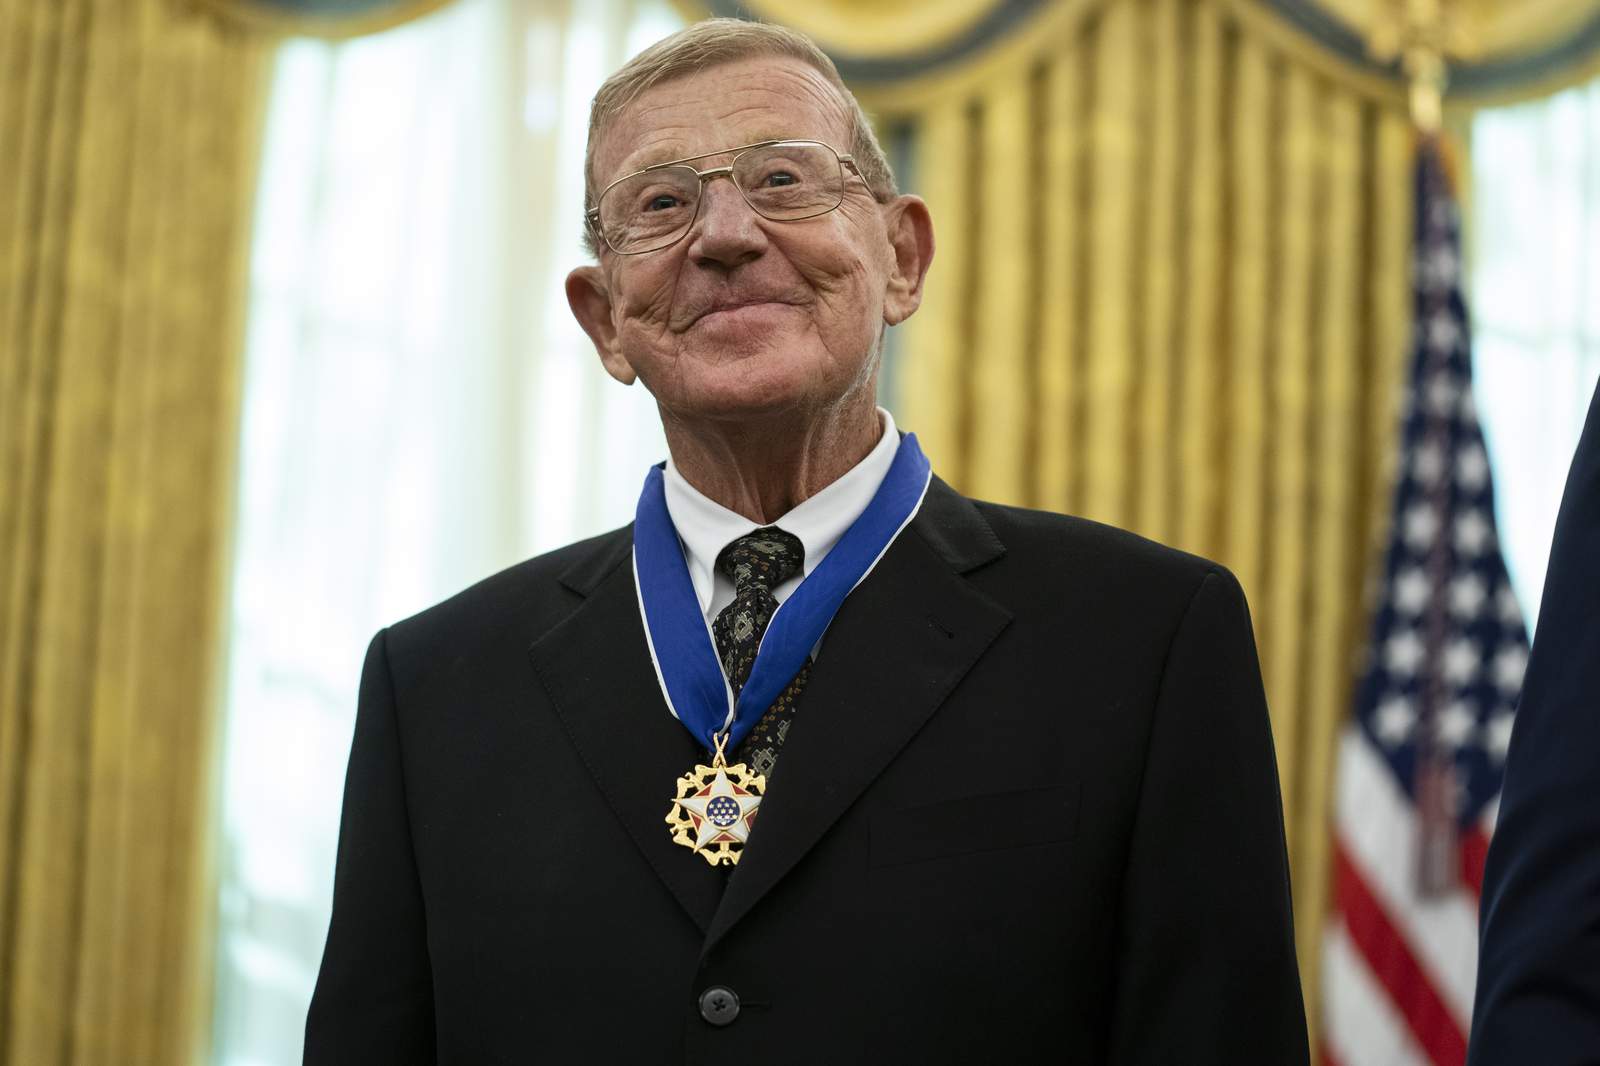 Trump honors football coach Holtz as 'one of the greatest'